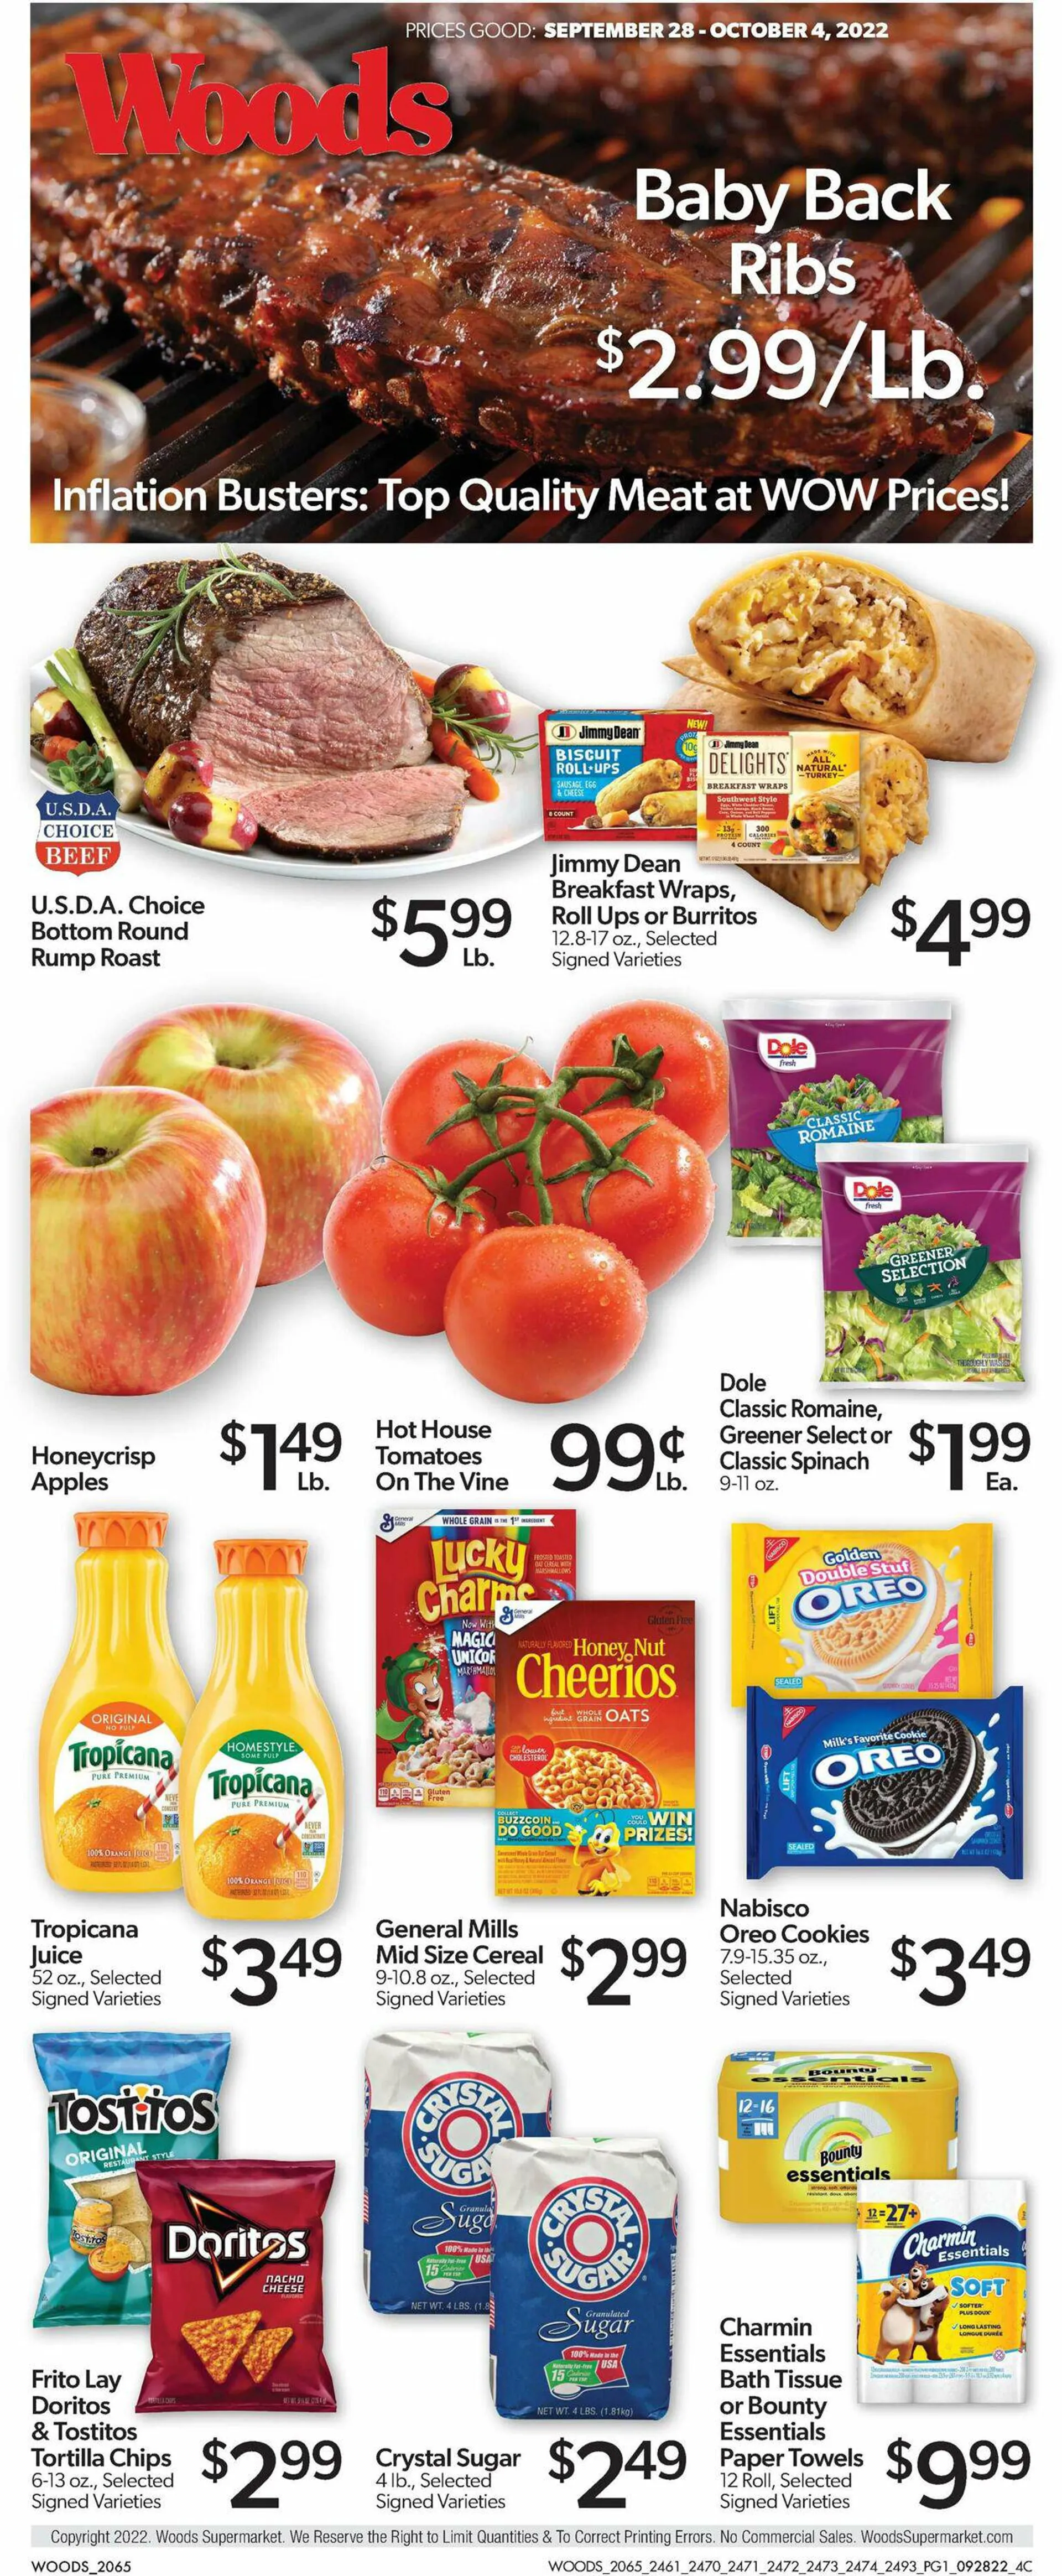 Woods Supermarket Current weekly ad - 1